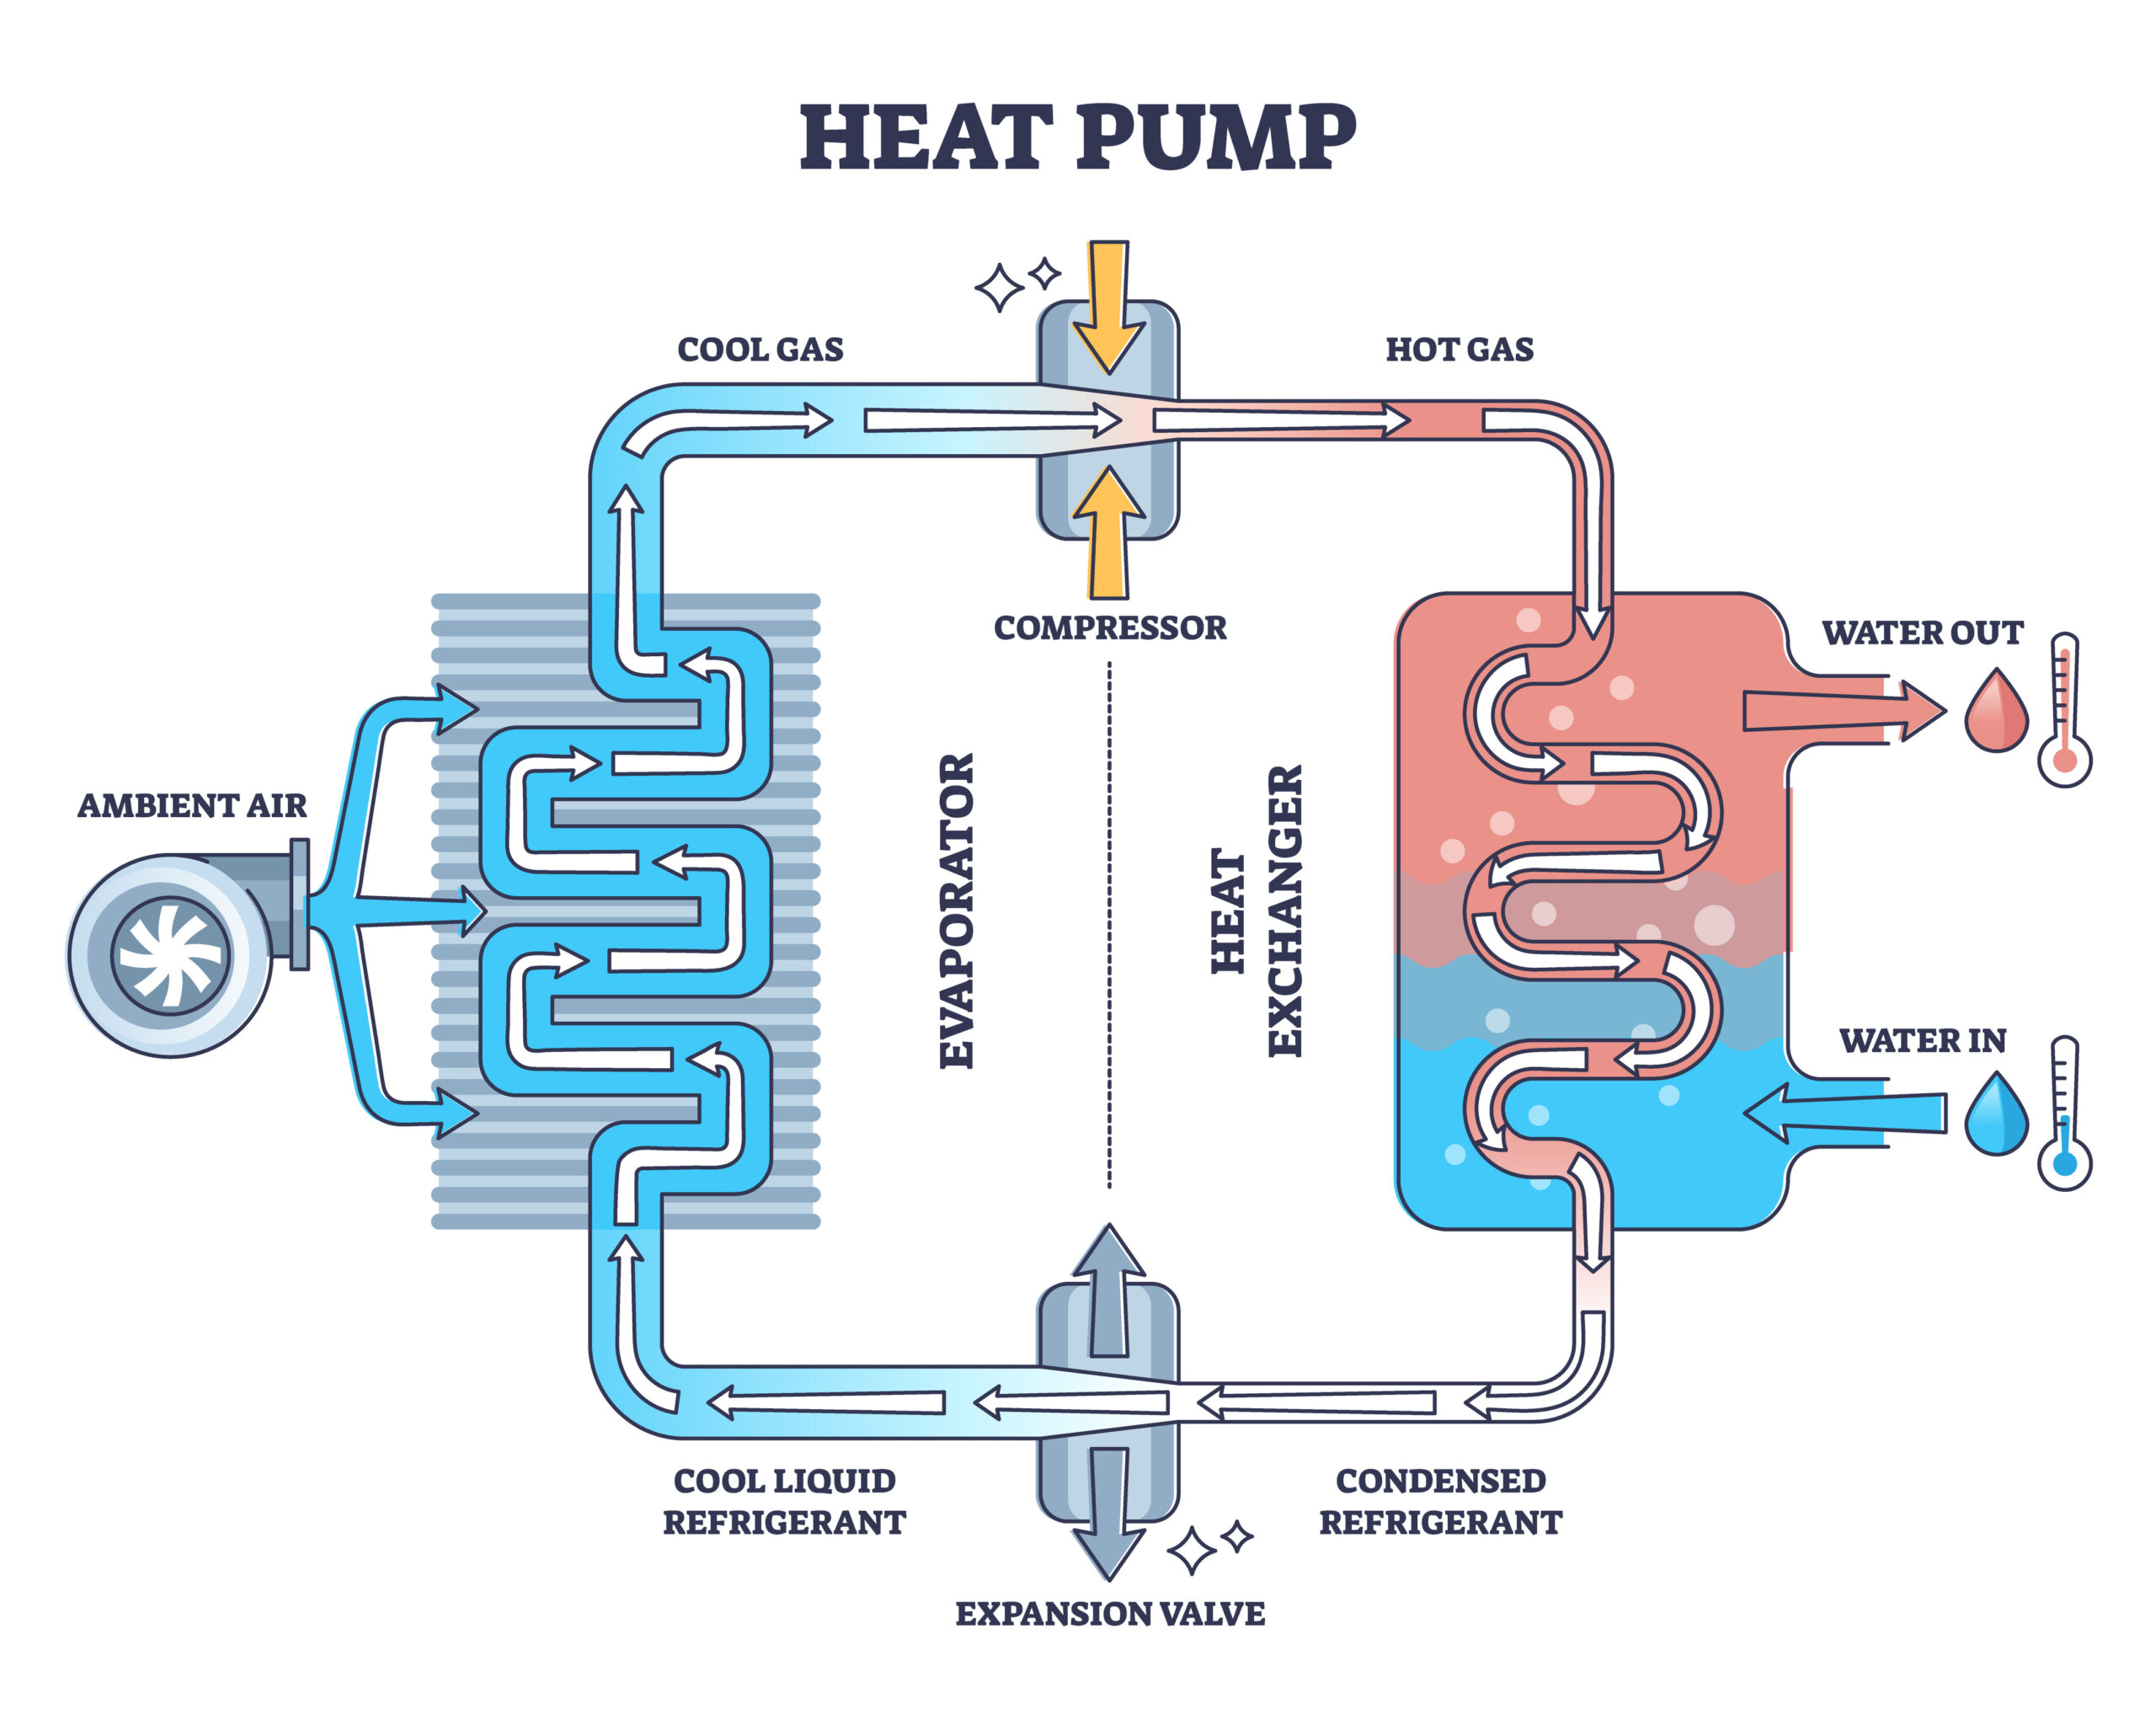 with-up-to-65-more-efficiency-how-do-heat-pumps-work-powerpal